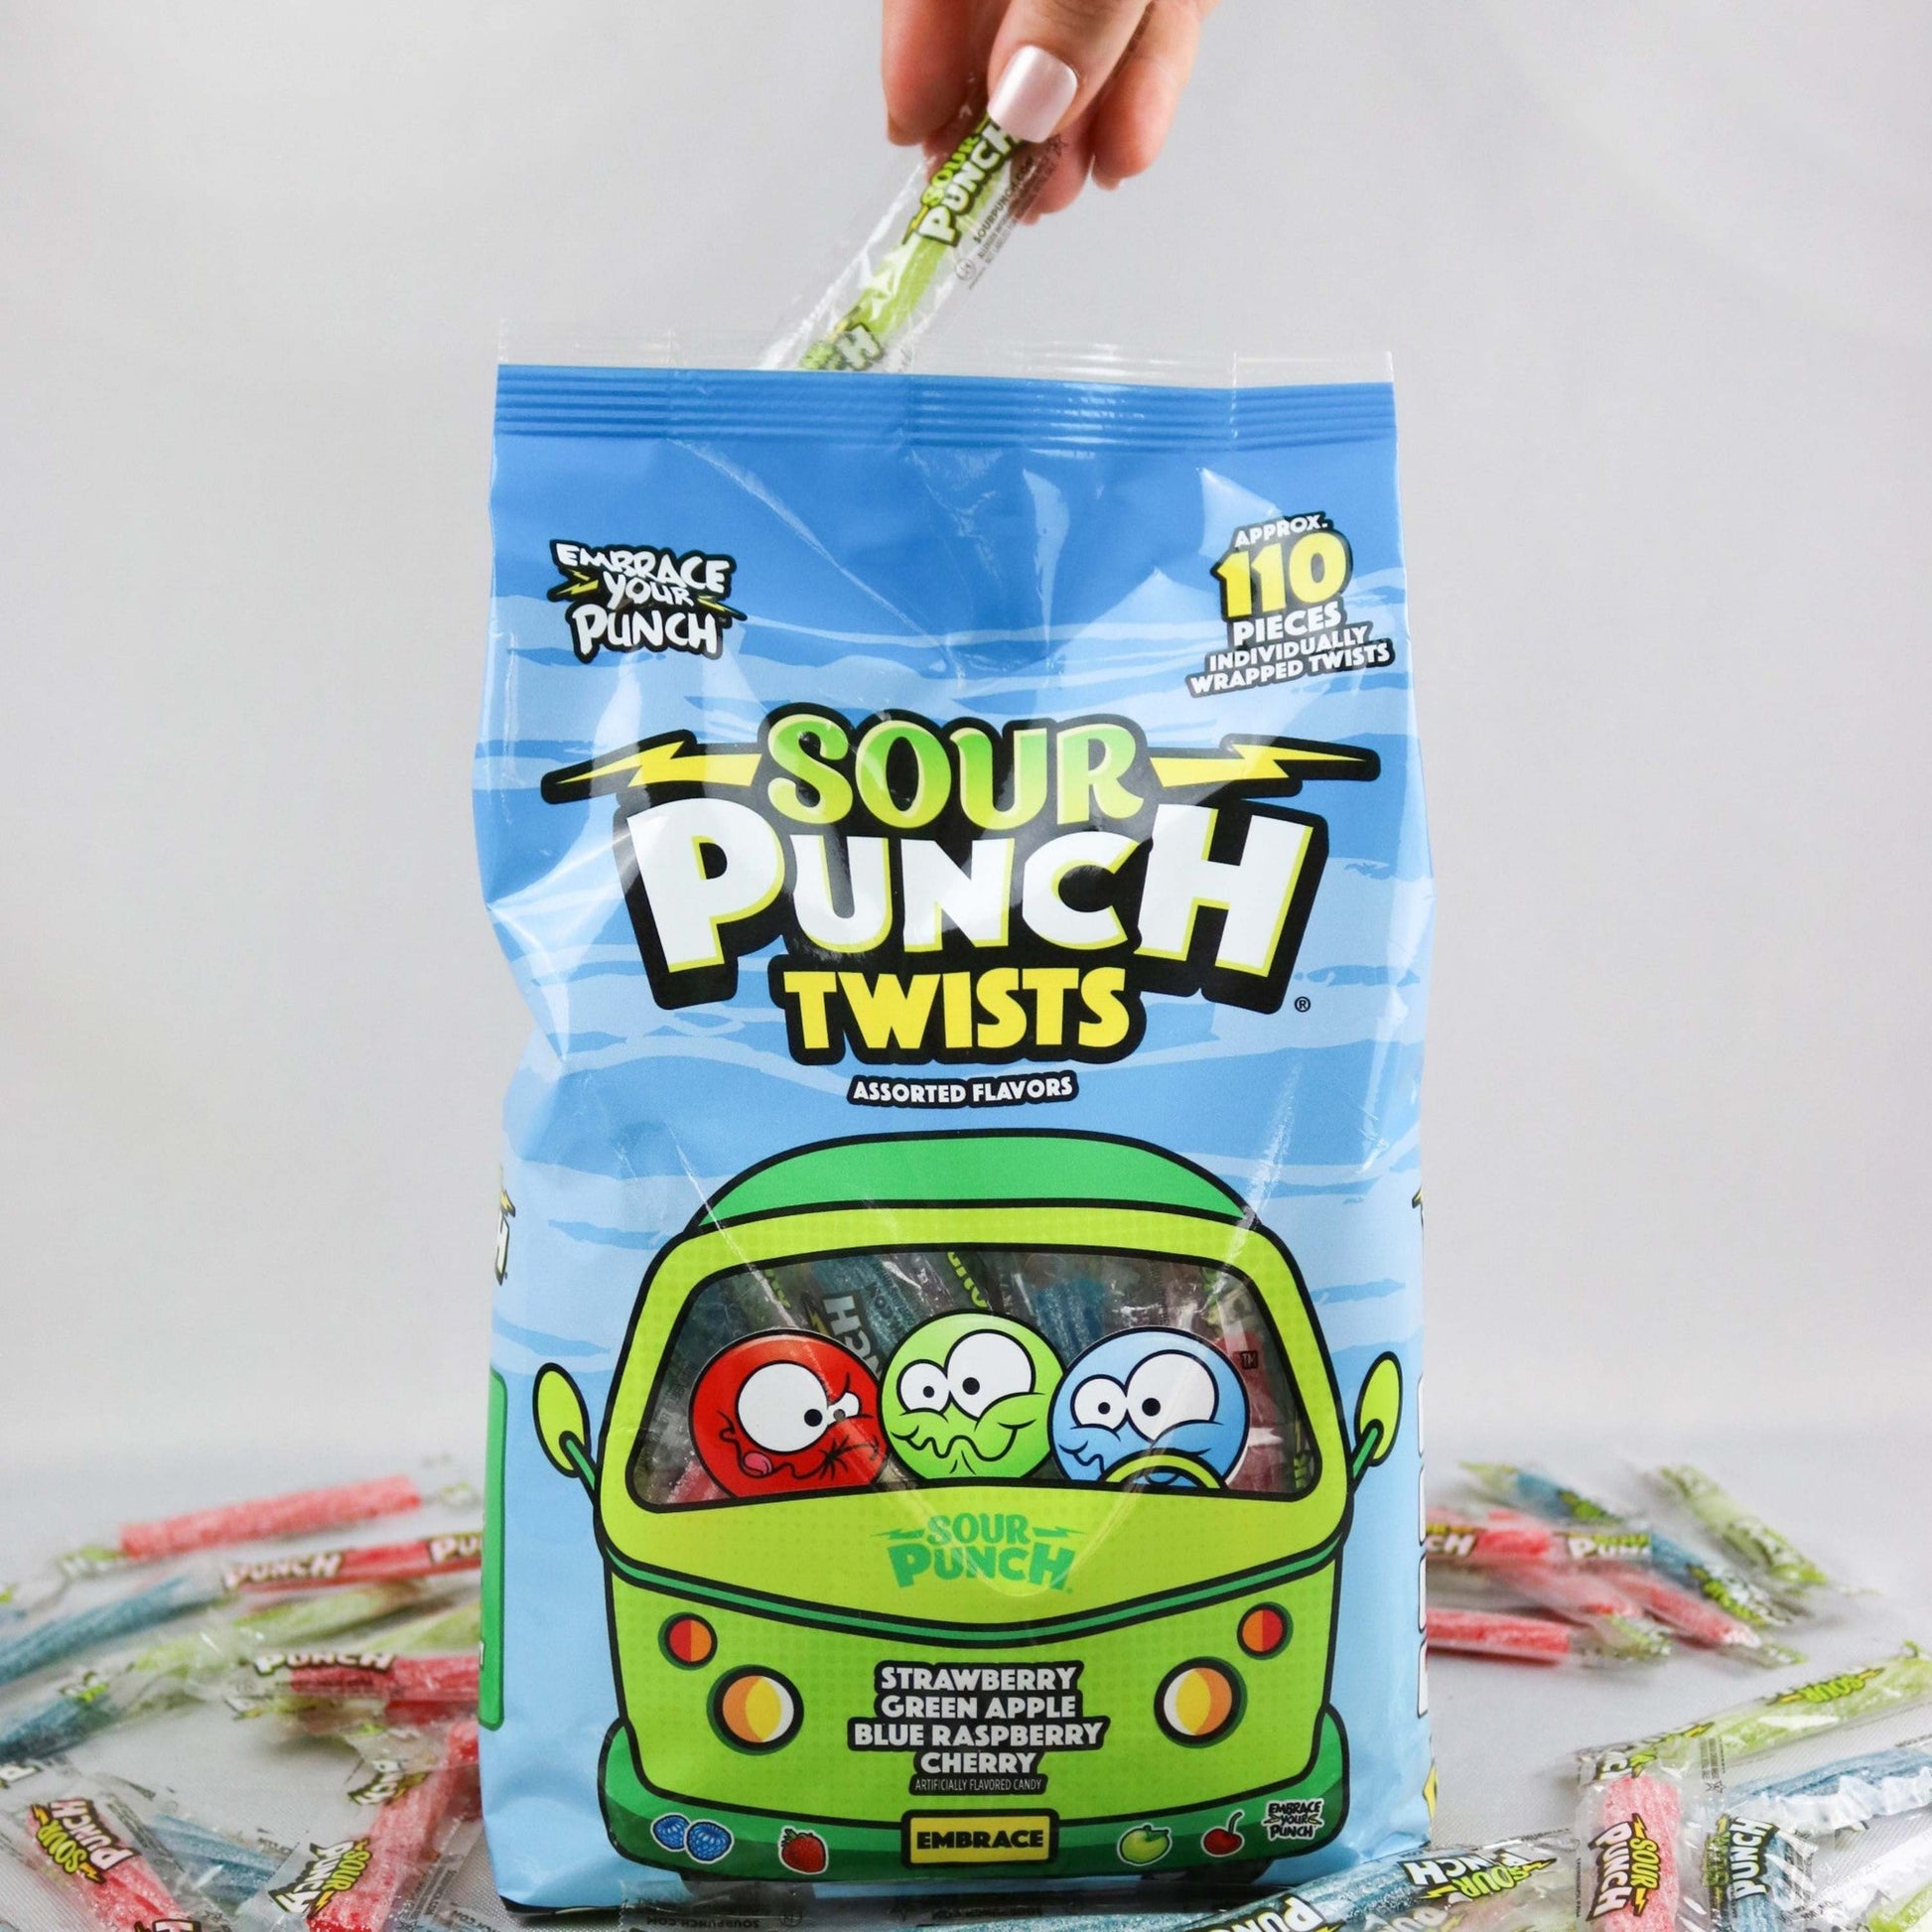 Hand reaching into bag to grab a SOUR PUNCH Individually Wrapped Candy Twist